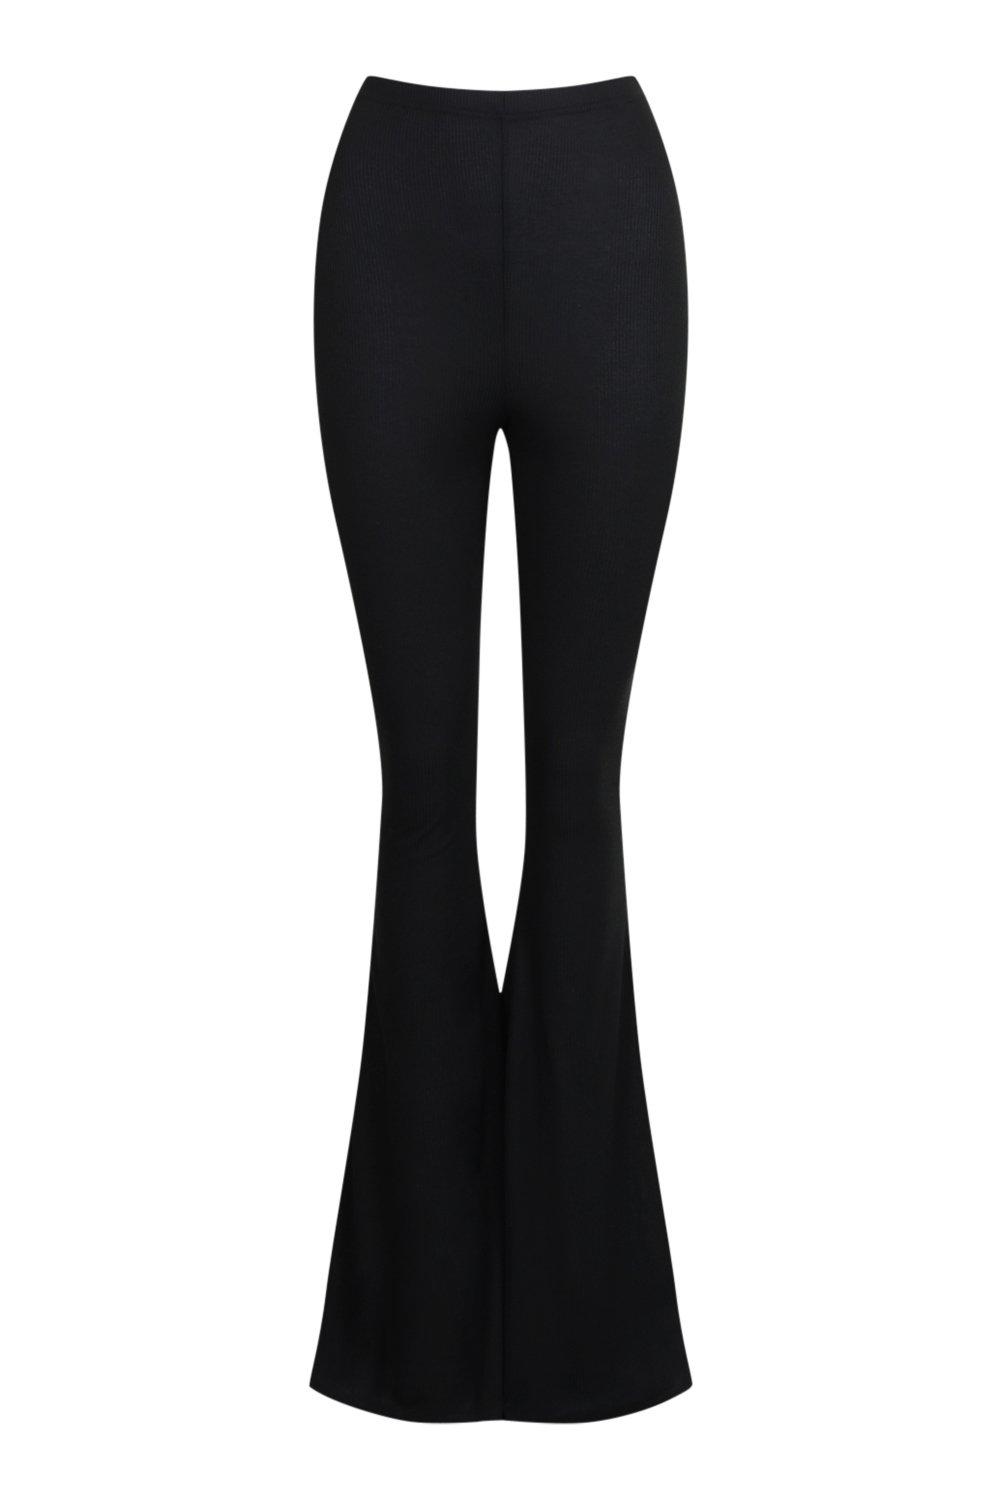 Missguided Tall ribbed flare trousers in black